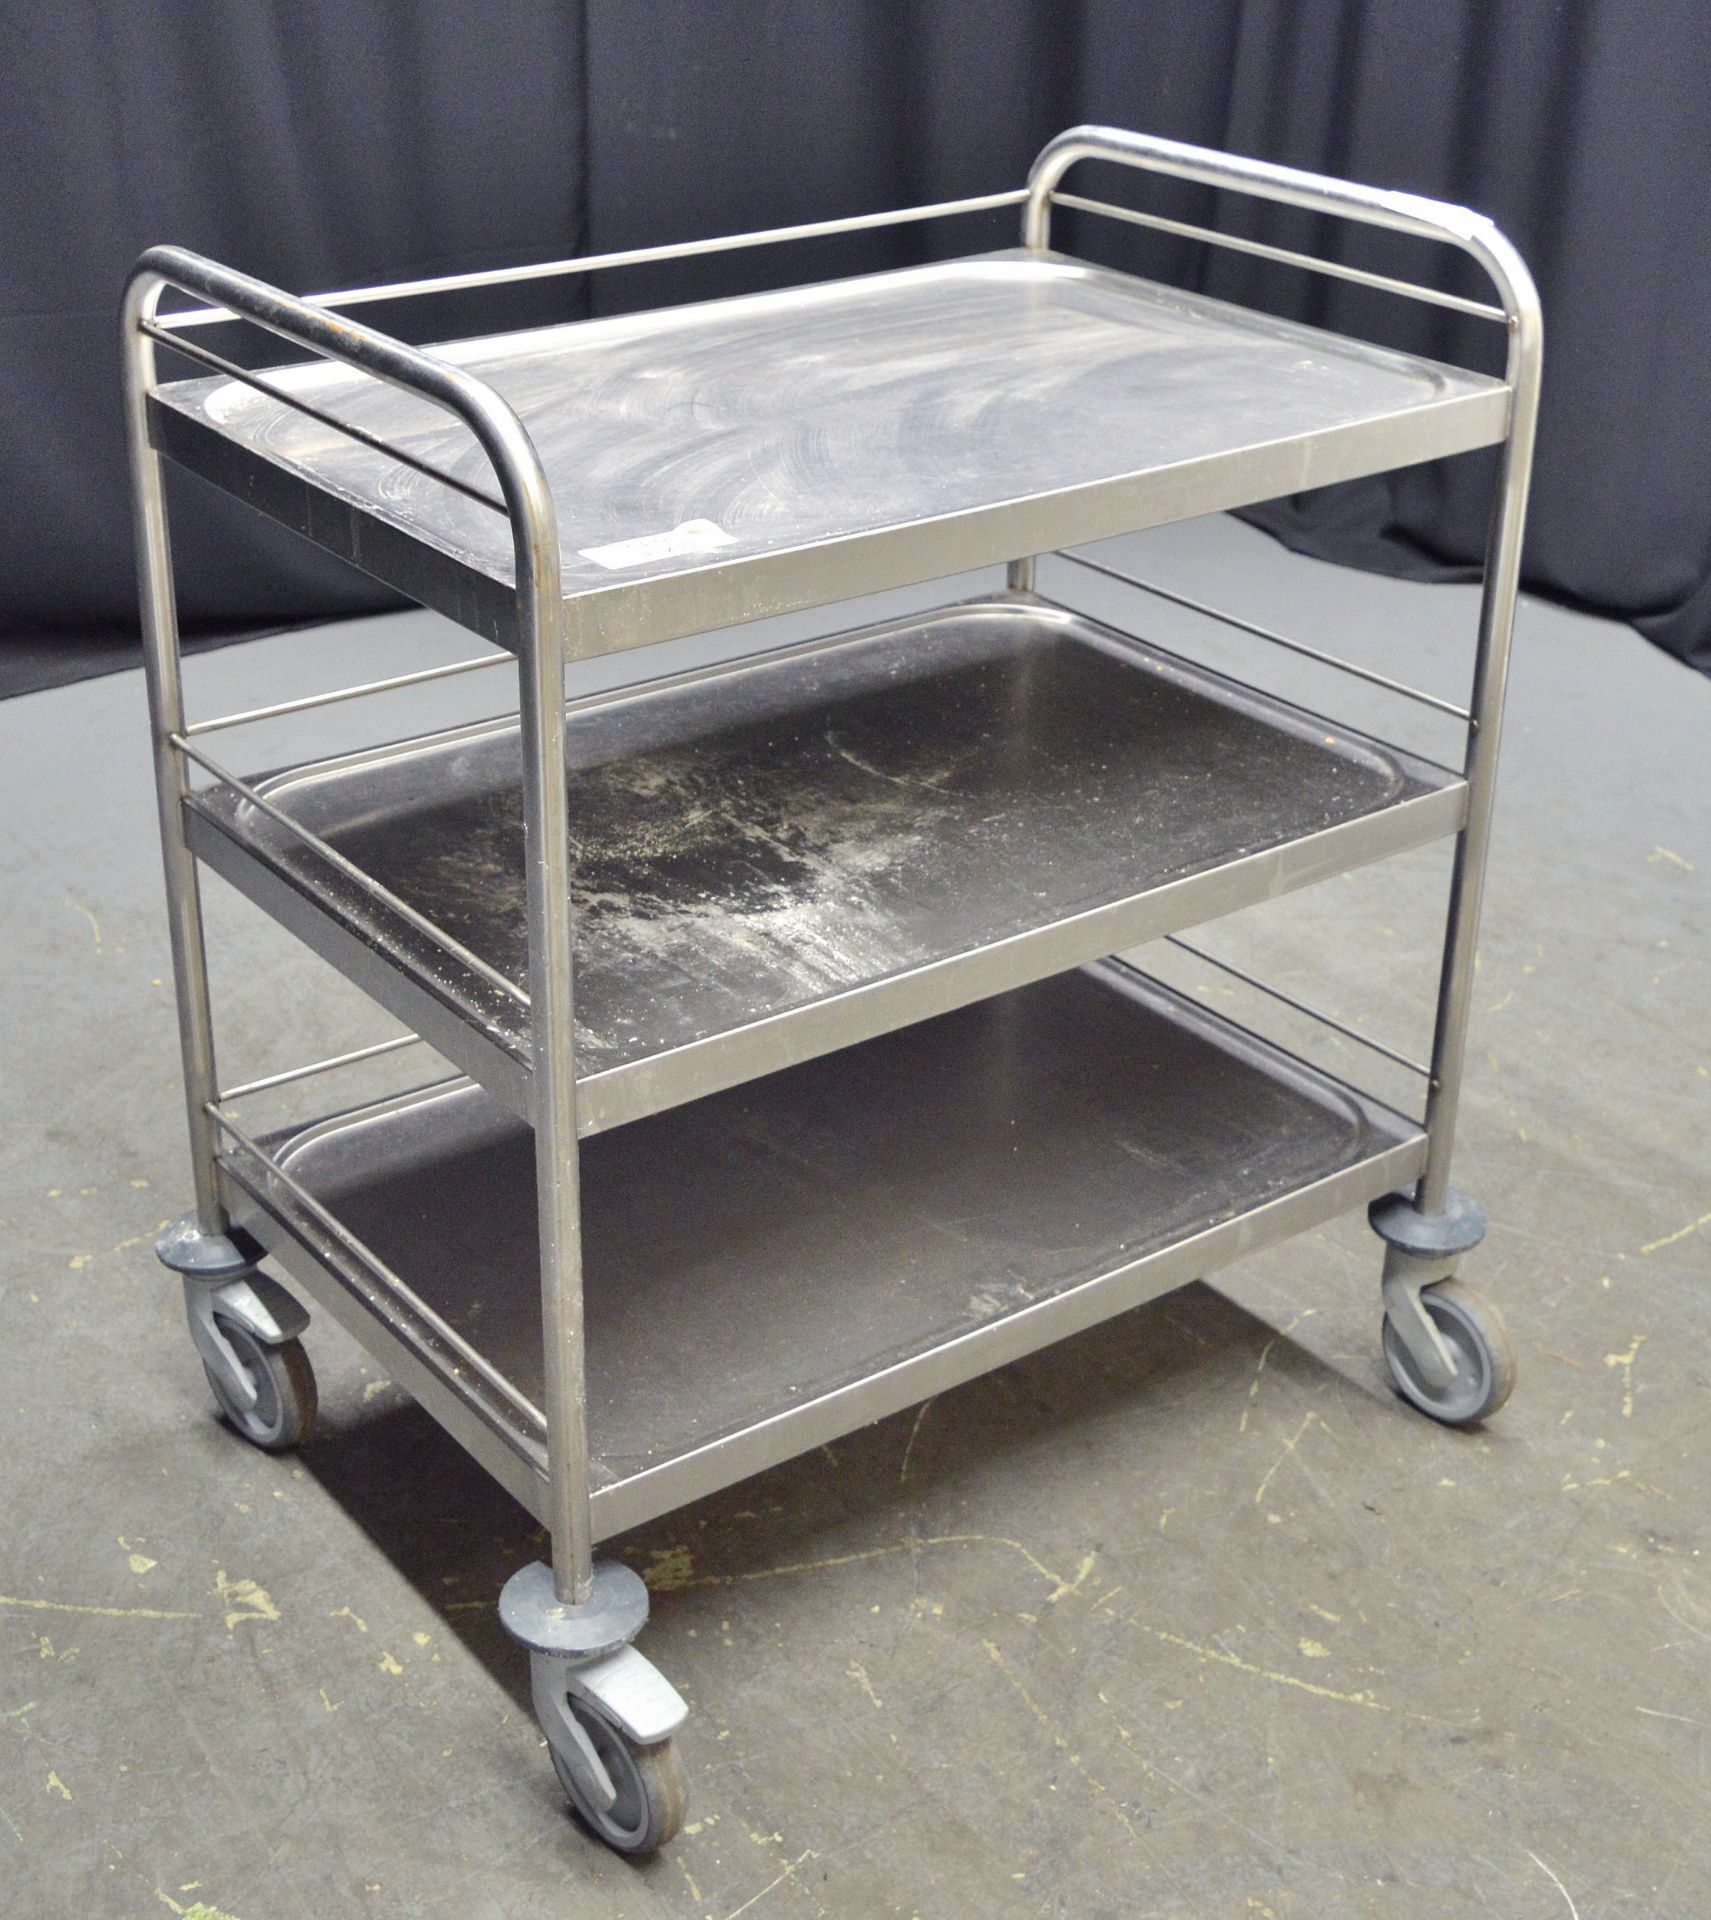 Stainless Steel 3 Tier Serving Trolley - L820 x W530 x H960mm - Image 2 of 3